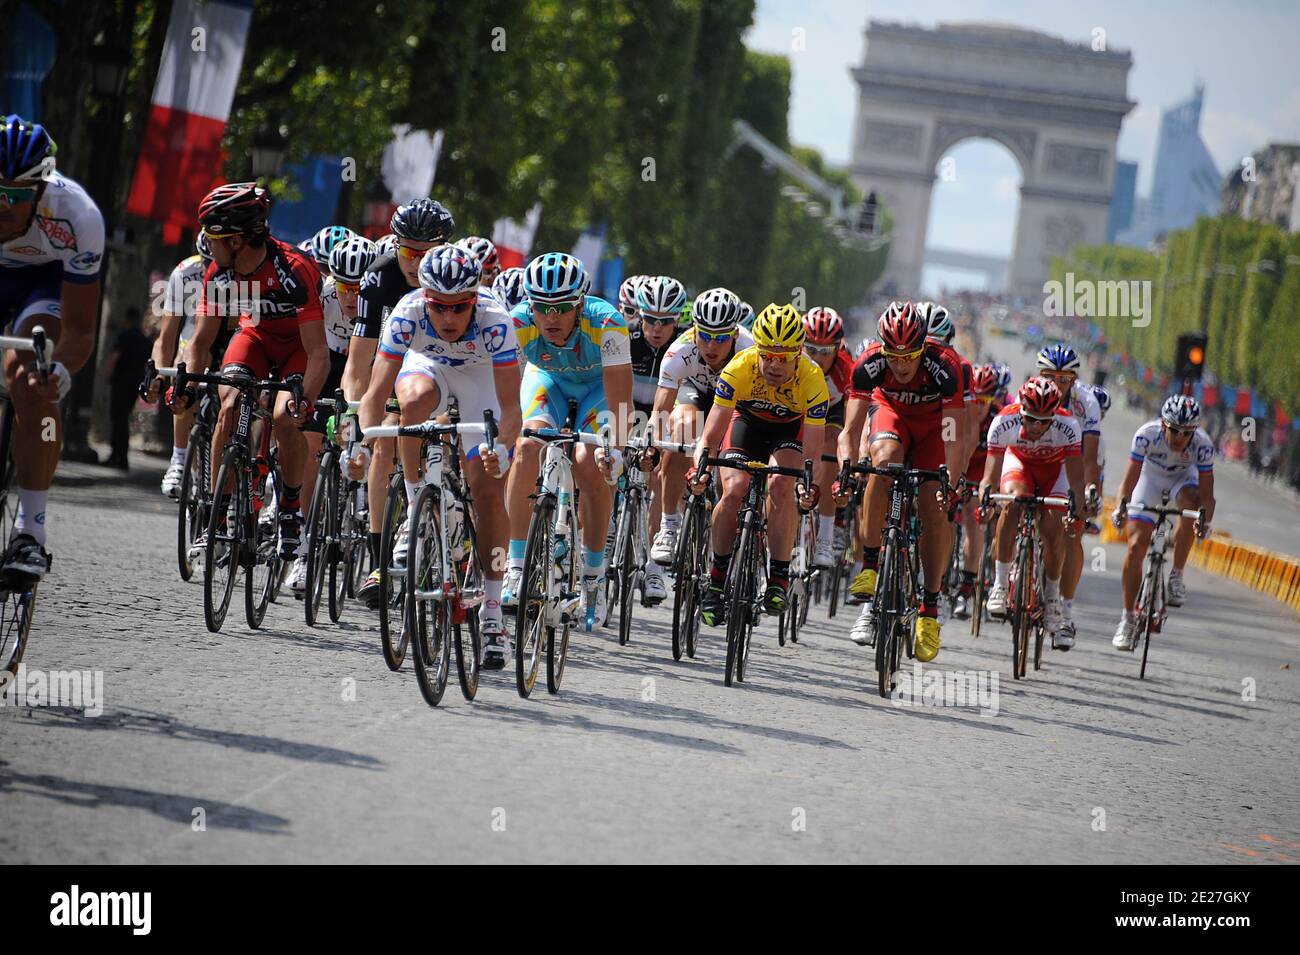 Australia's Cadel Evans during the 21st and final stage of the 98th Tour de France cycling race between Creteil and Paris, on the Champs Elysees, in Paris, France on July 24, 2011. Photo by Giancarlo Gorassini/ABACAPRESS.COM Stock Photo